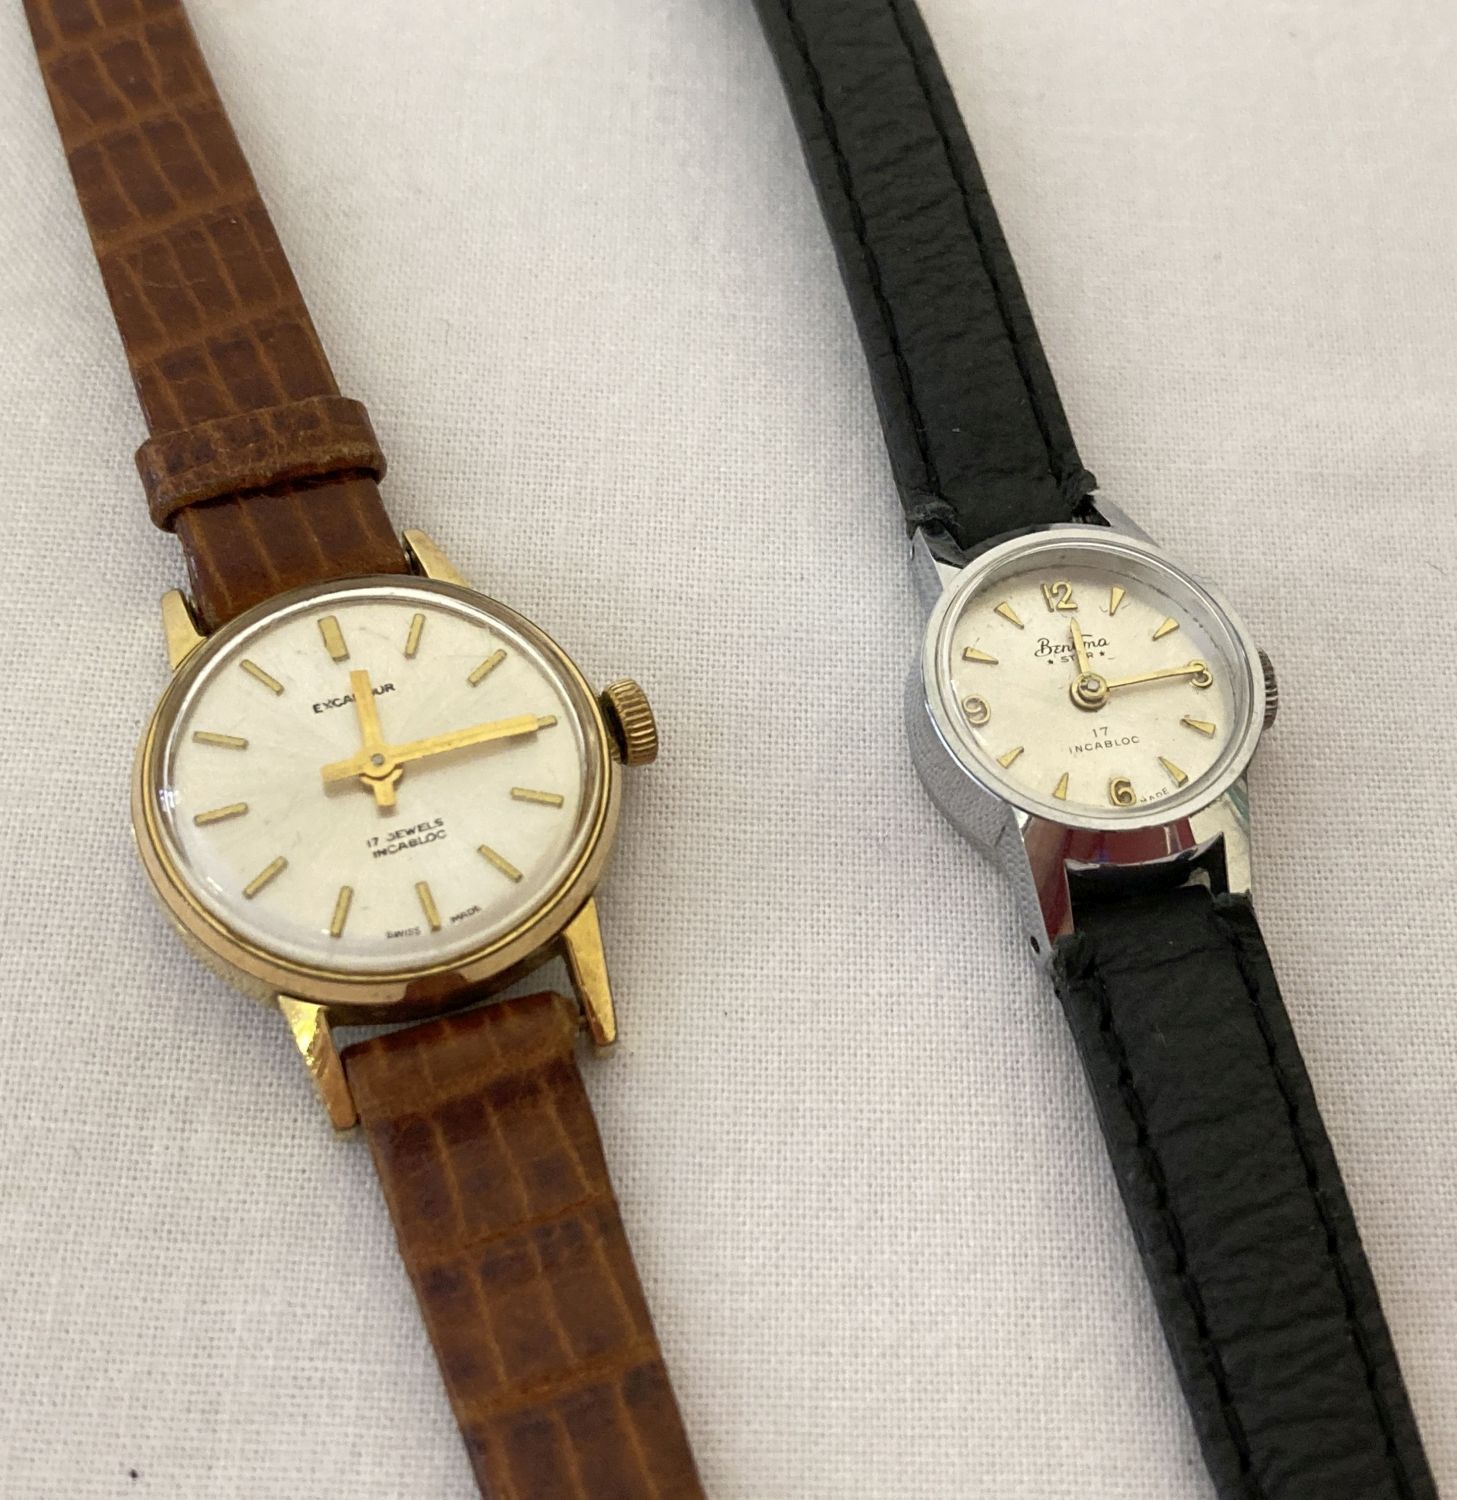 2 ladies vintage wristwatches. An Excalibur with white dial and gold tone hands and hour markers.